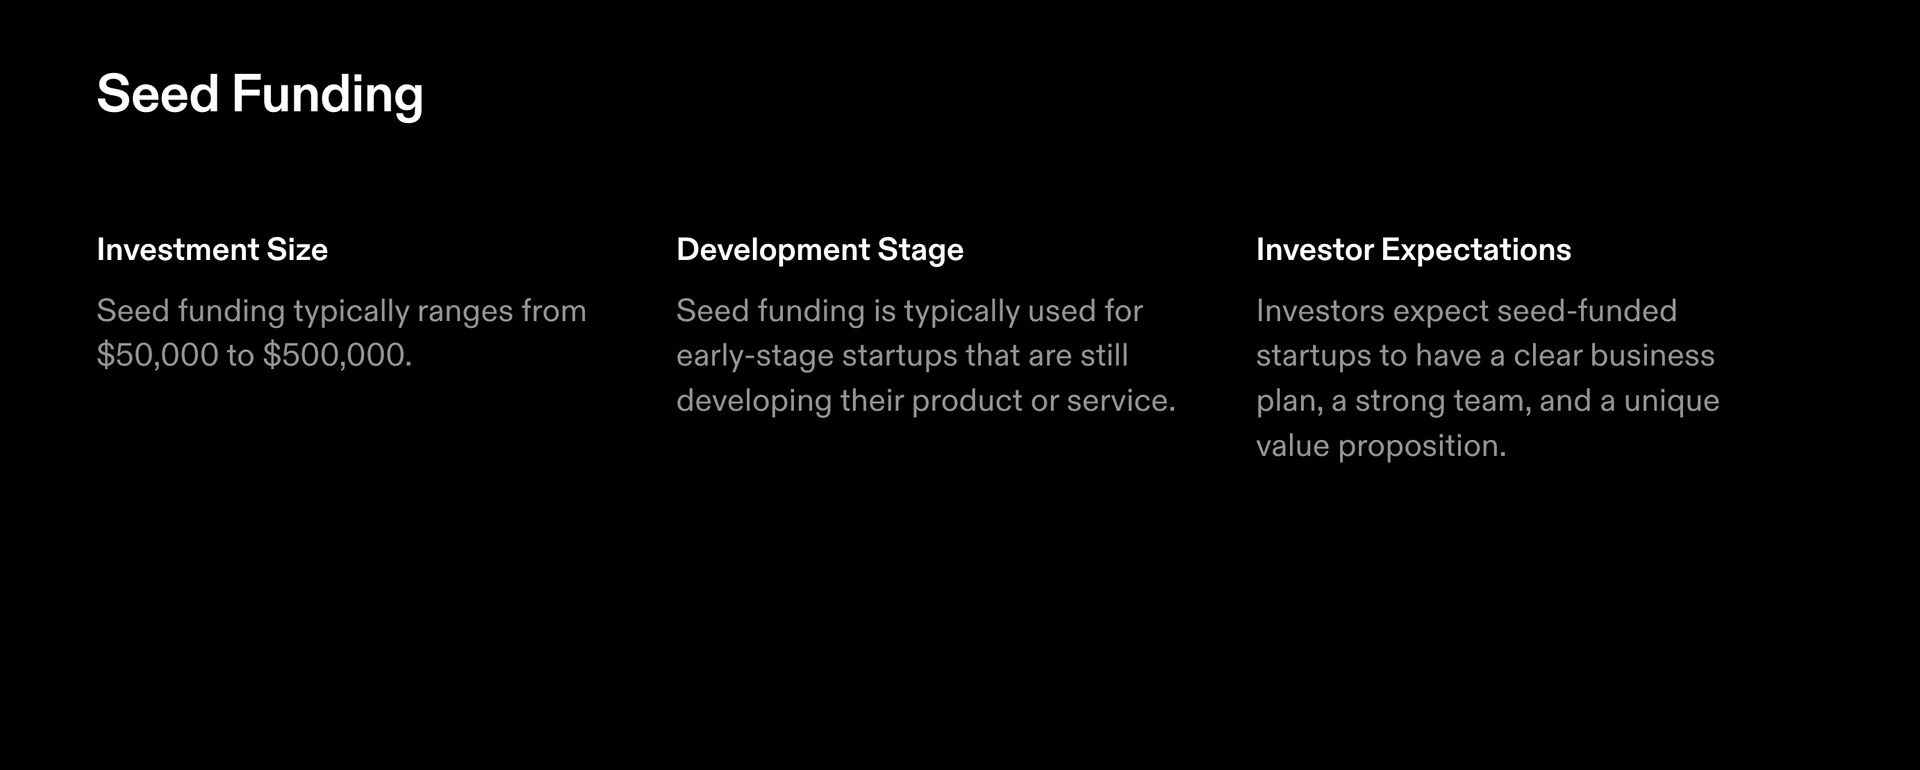 Seed Startup Funding: Investment size, development stage and investor expectations